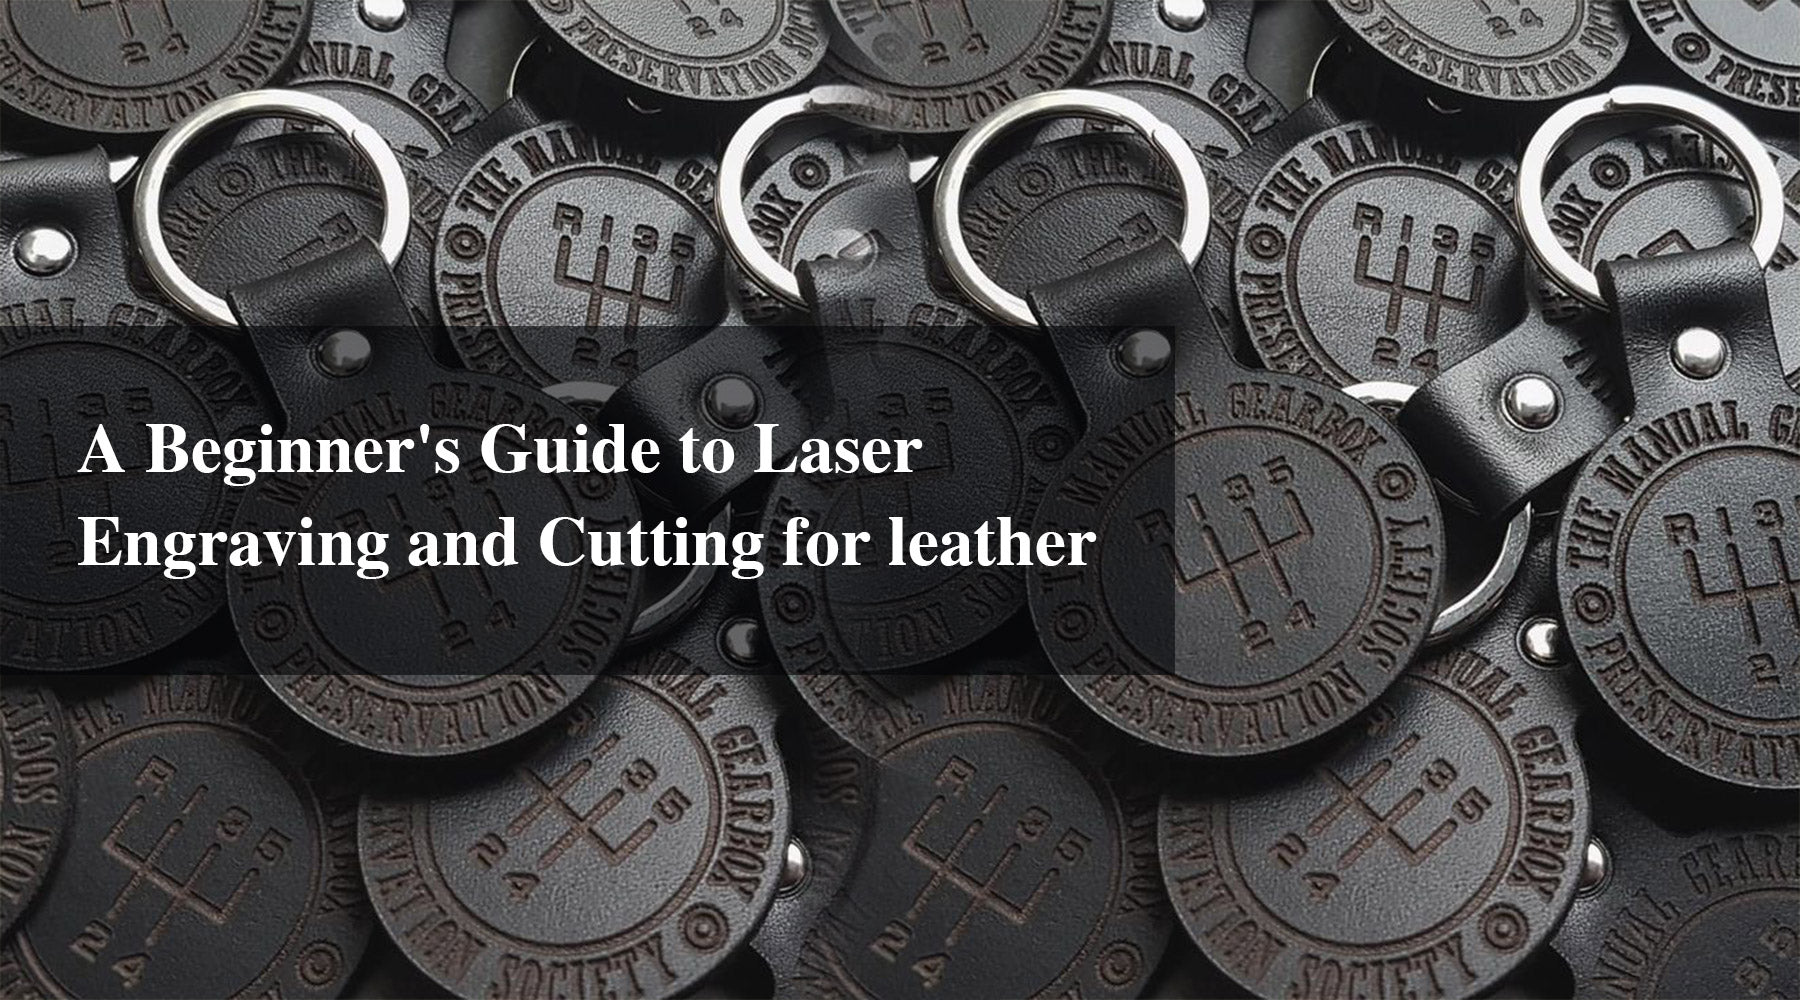 A Beginner's Guide to Laser Engraving and Cutting for leather